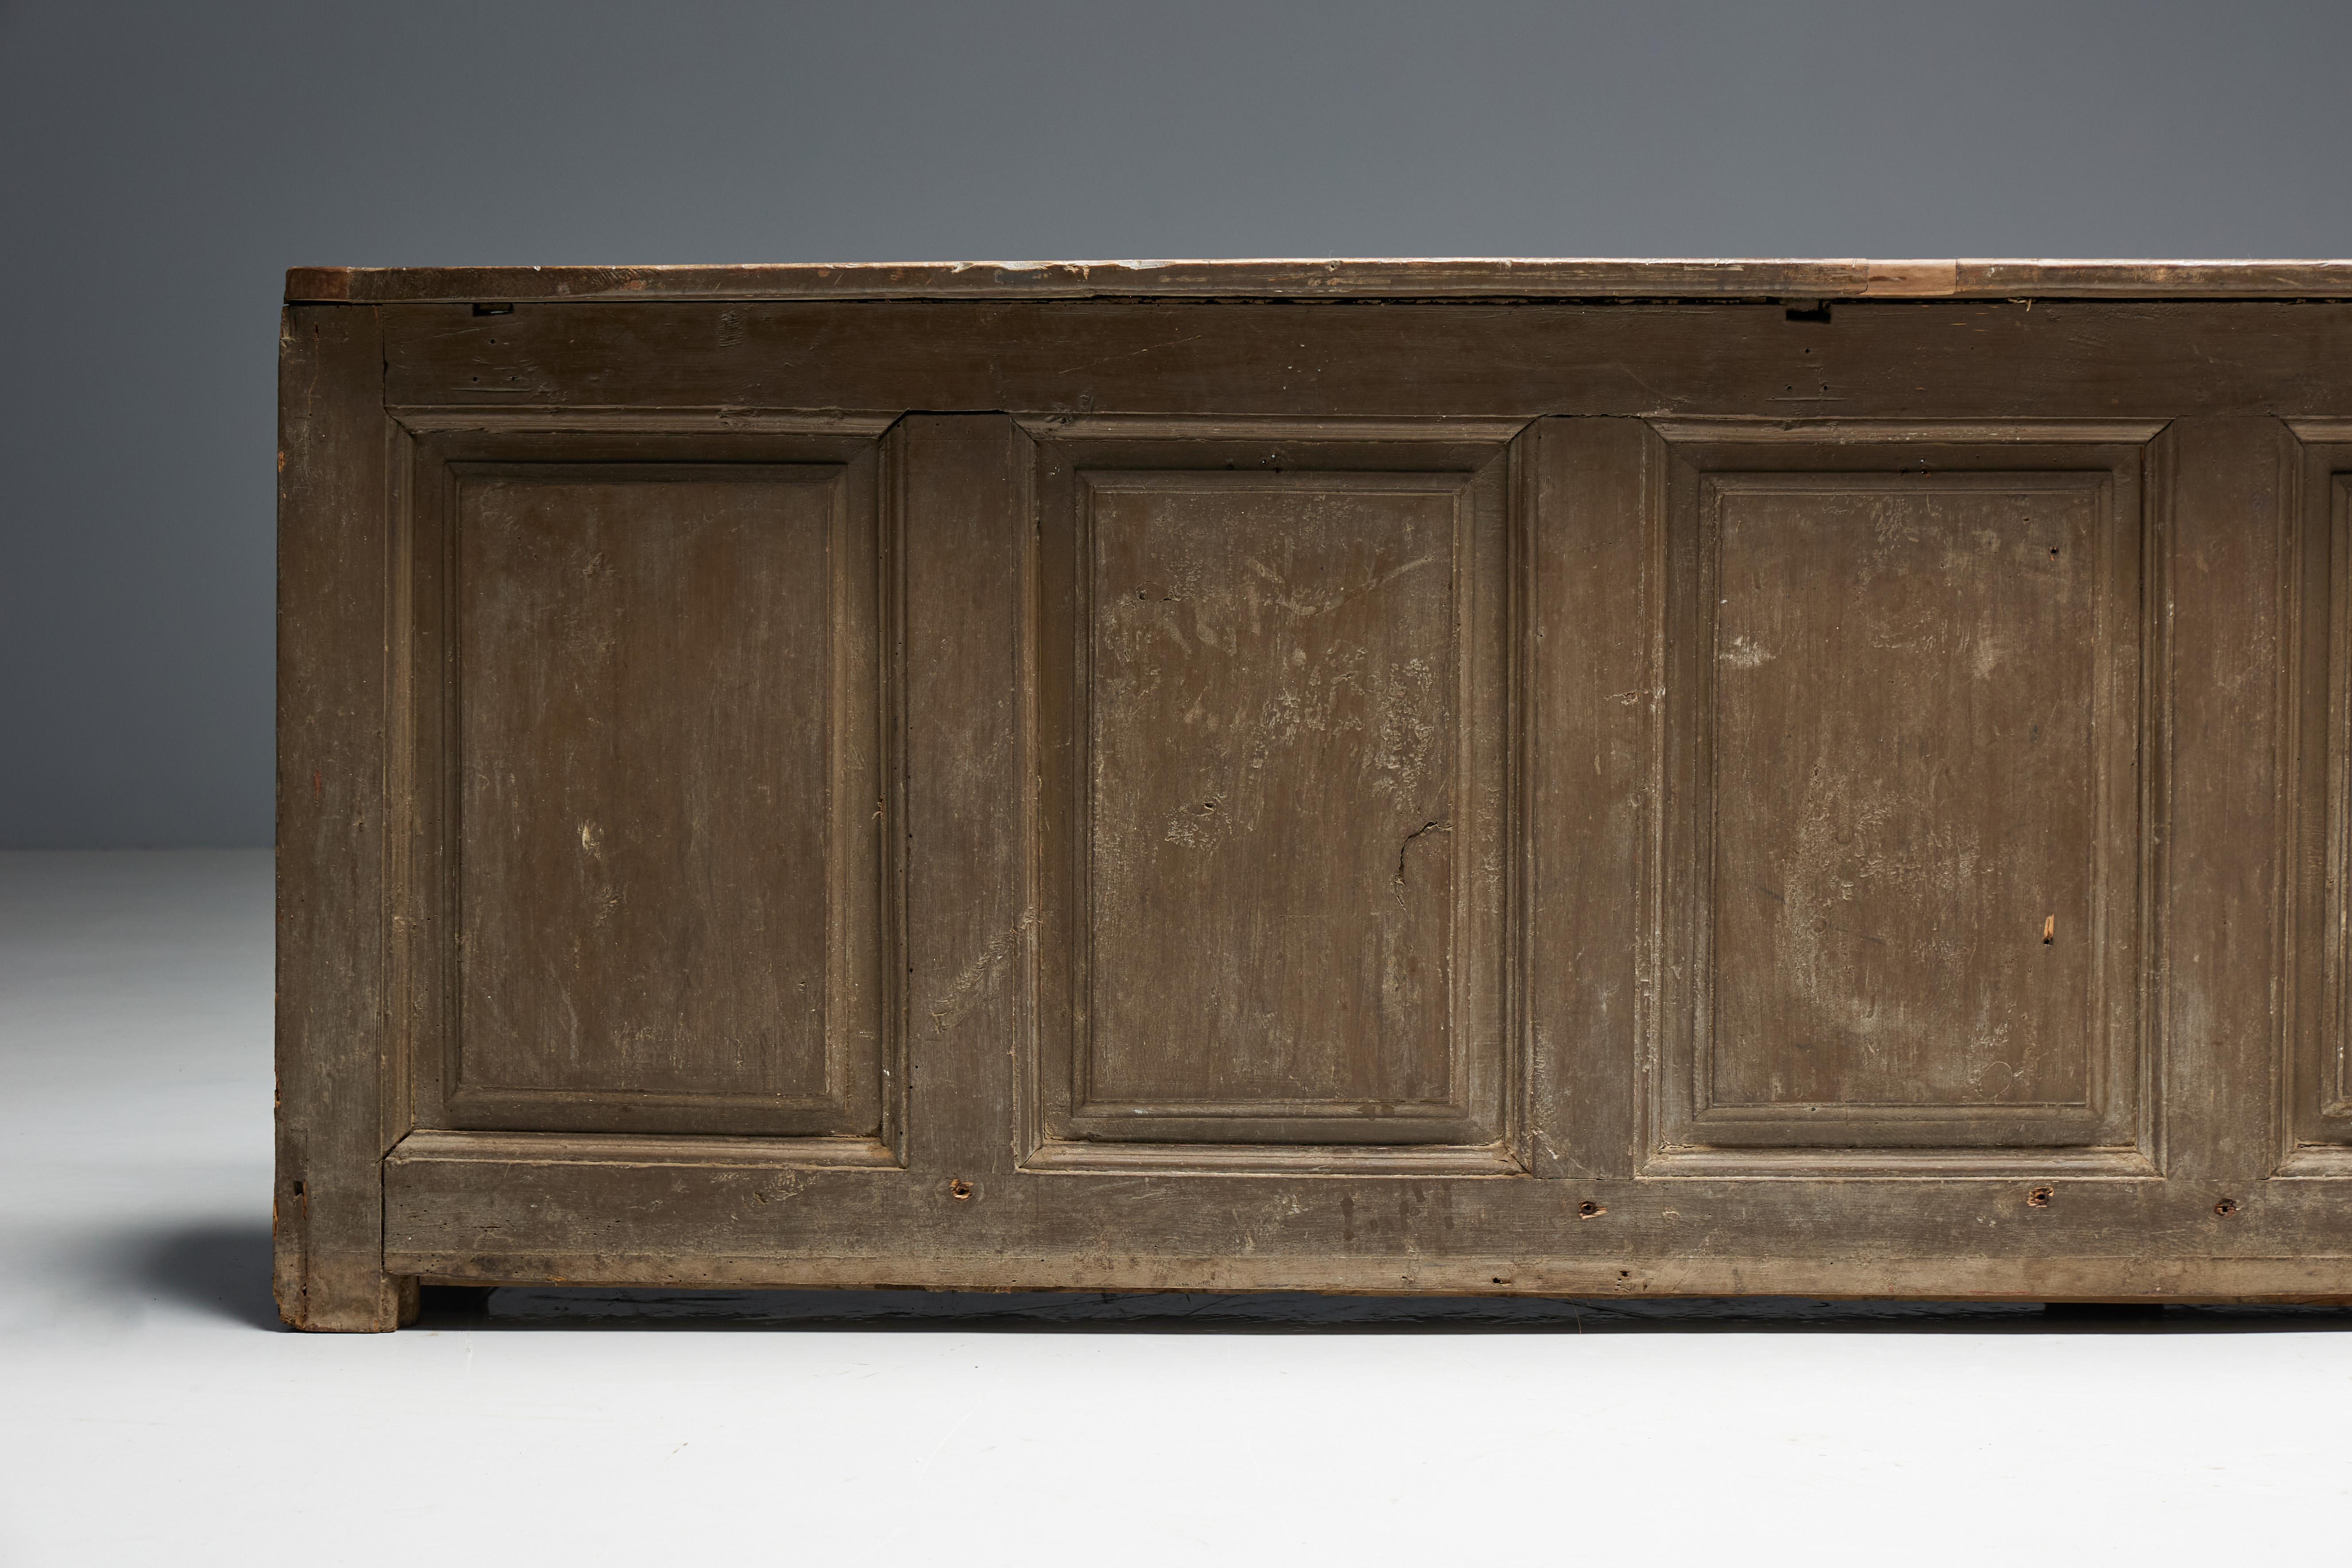 Rustic Art Populaire Freestanding Bar Counter, France, 19th Century 12